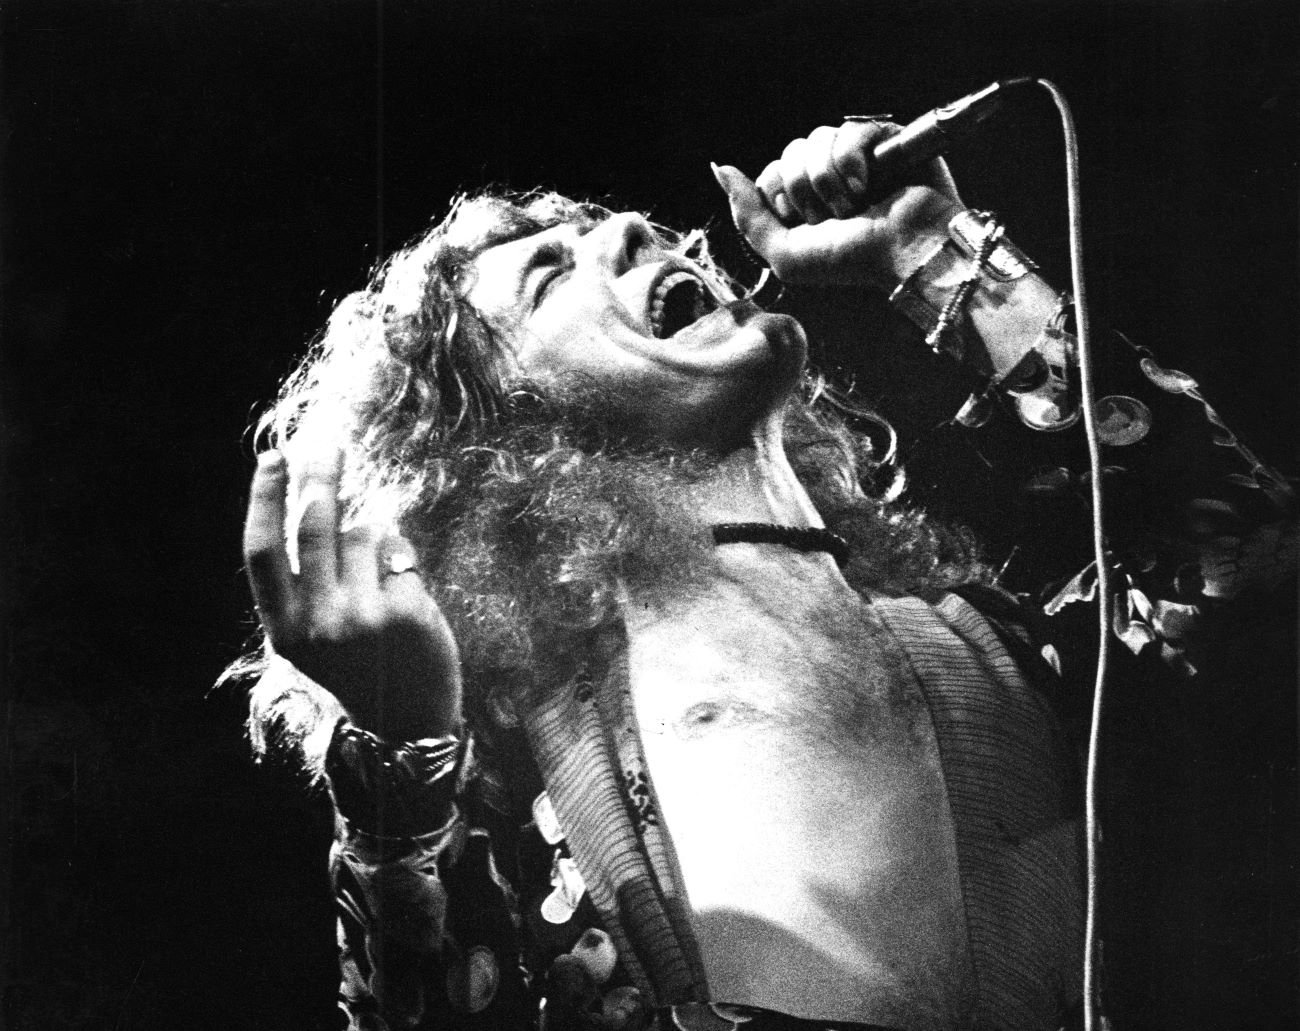 A black and white picture of Robert Plant singing into a microphone with his shirt open.